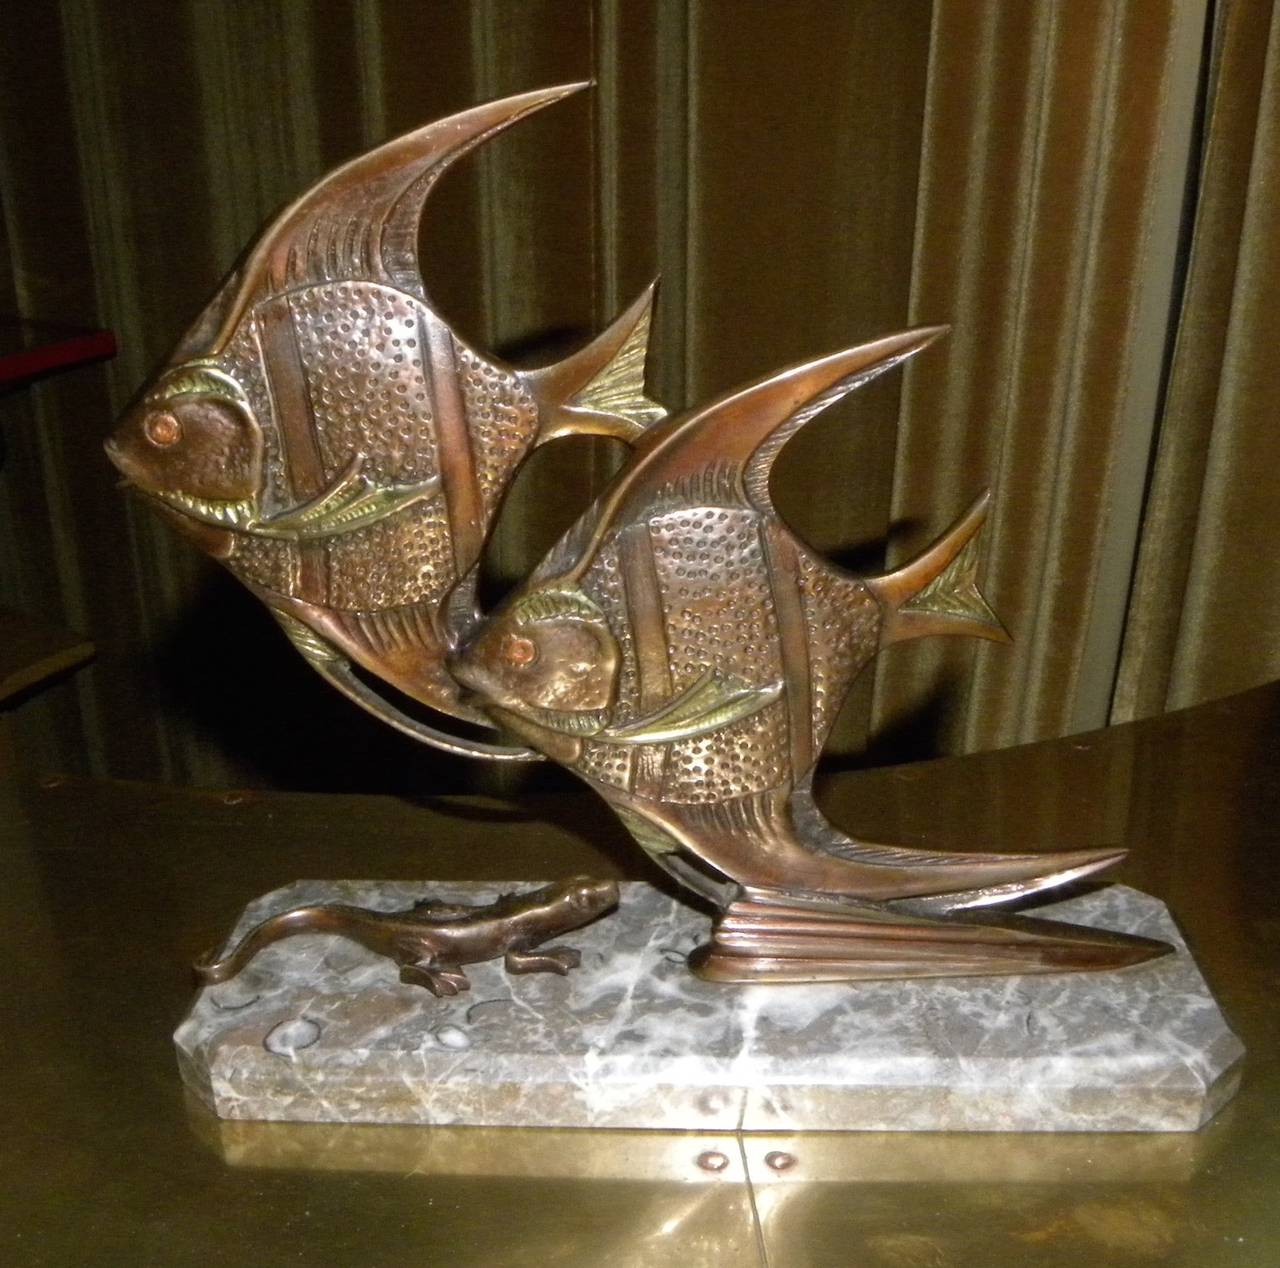 Very fine bronze pair of Angel fish with perfect patina on a marble base. They share this with a little gecko.

The marble is in new perfect condition and combination of this with the marble make this a very substantial
decorative item.